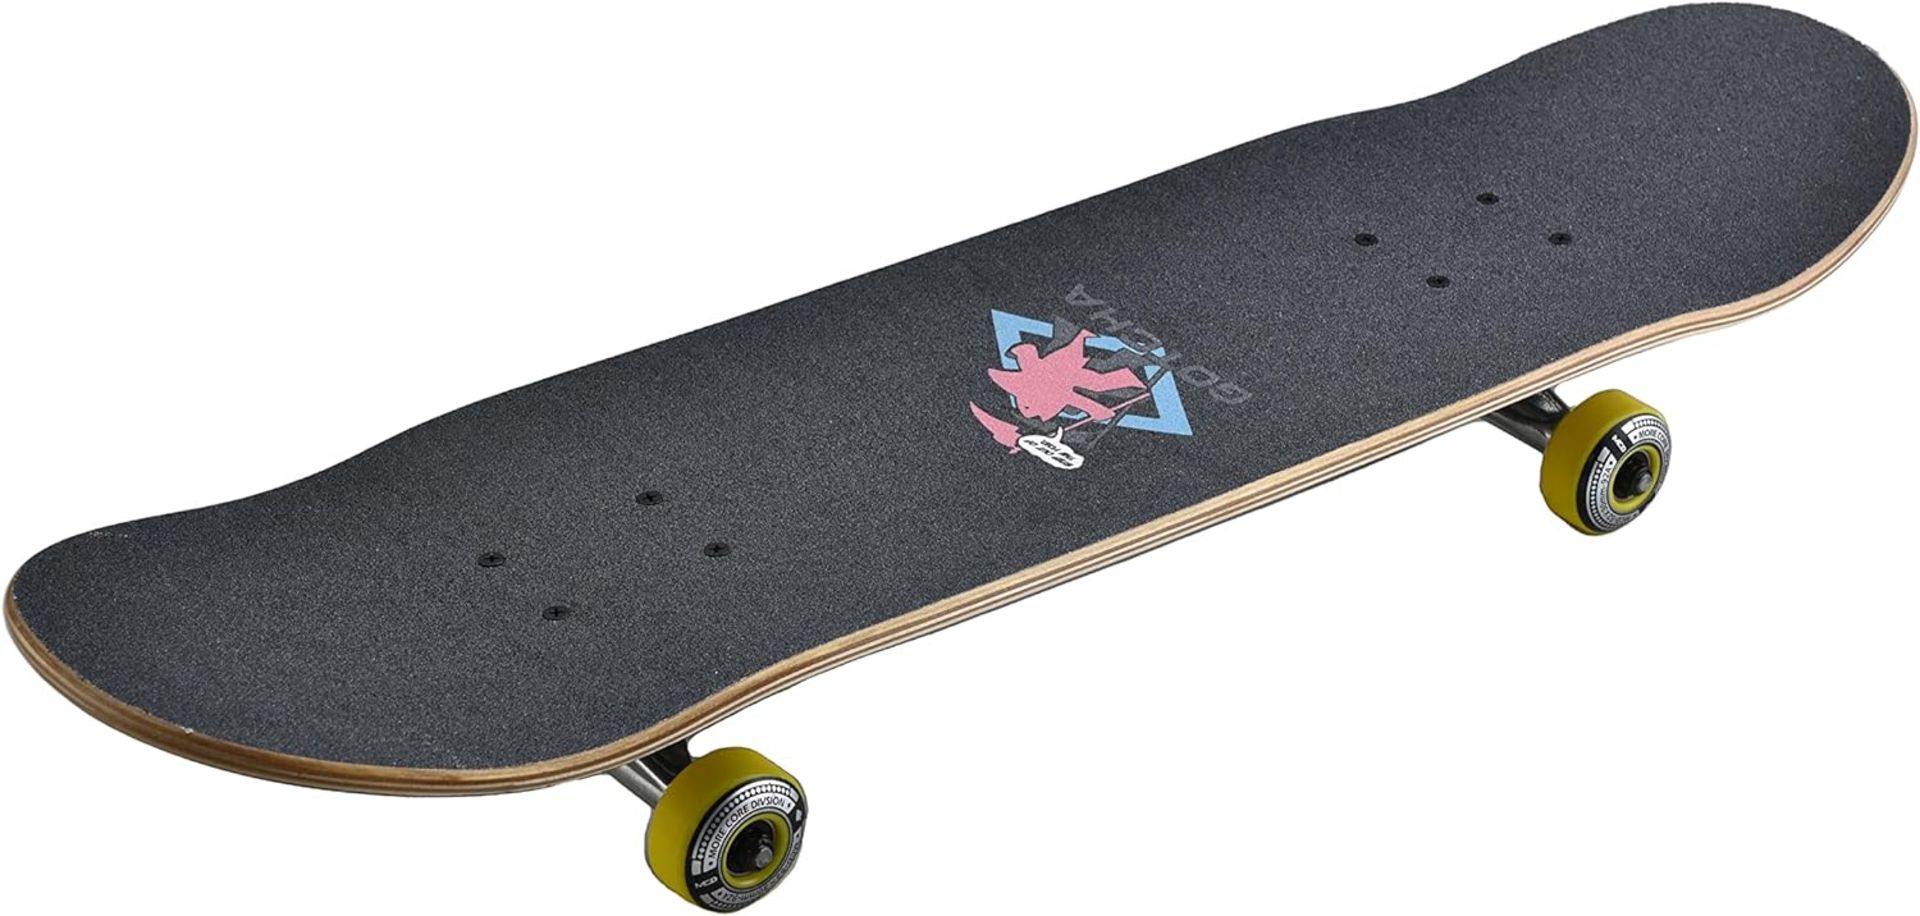 20 UNITS X NEW GOTCHA 31-INCH TO HELL POPSICLE SKATEBOARD ------------>>RRP £1700 - Image 5 of 5